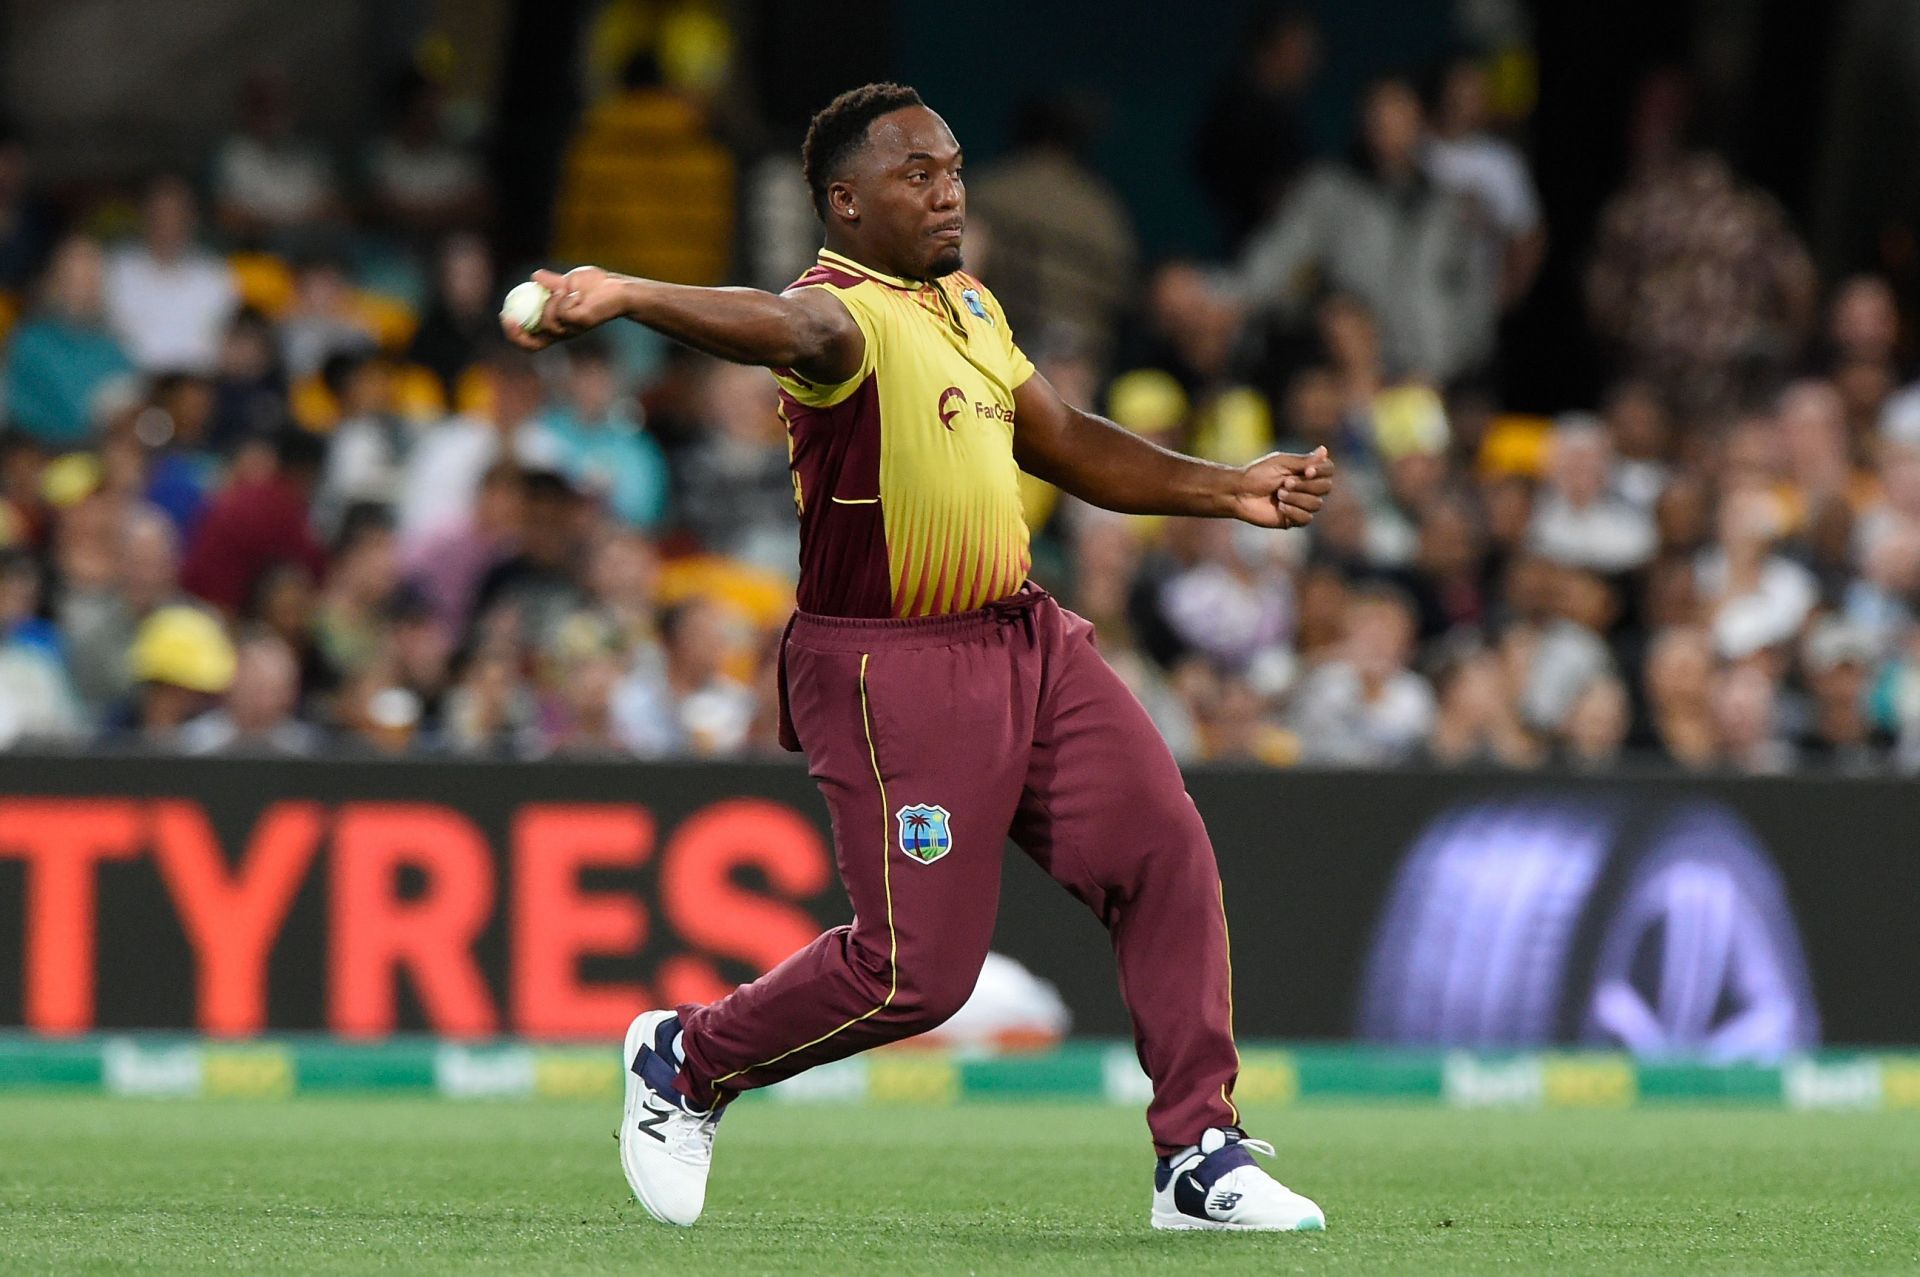 Australia v West Indies - T20I Series: Game 2 (Image: Getty)